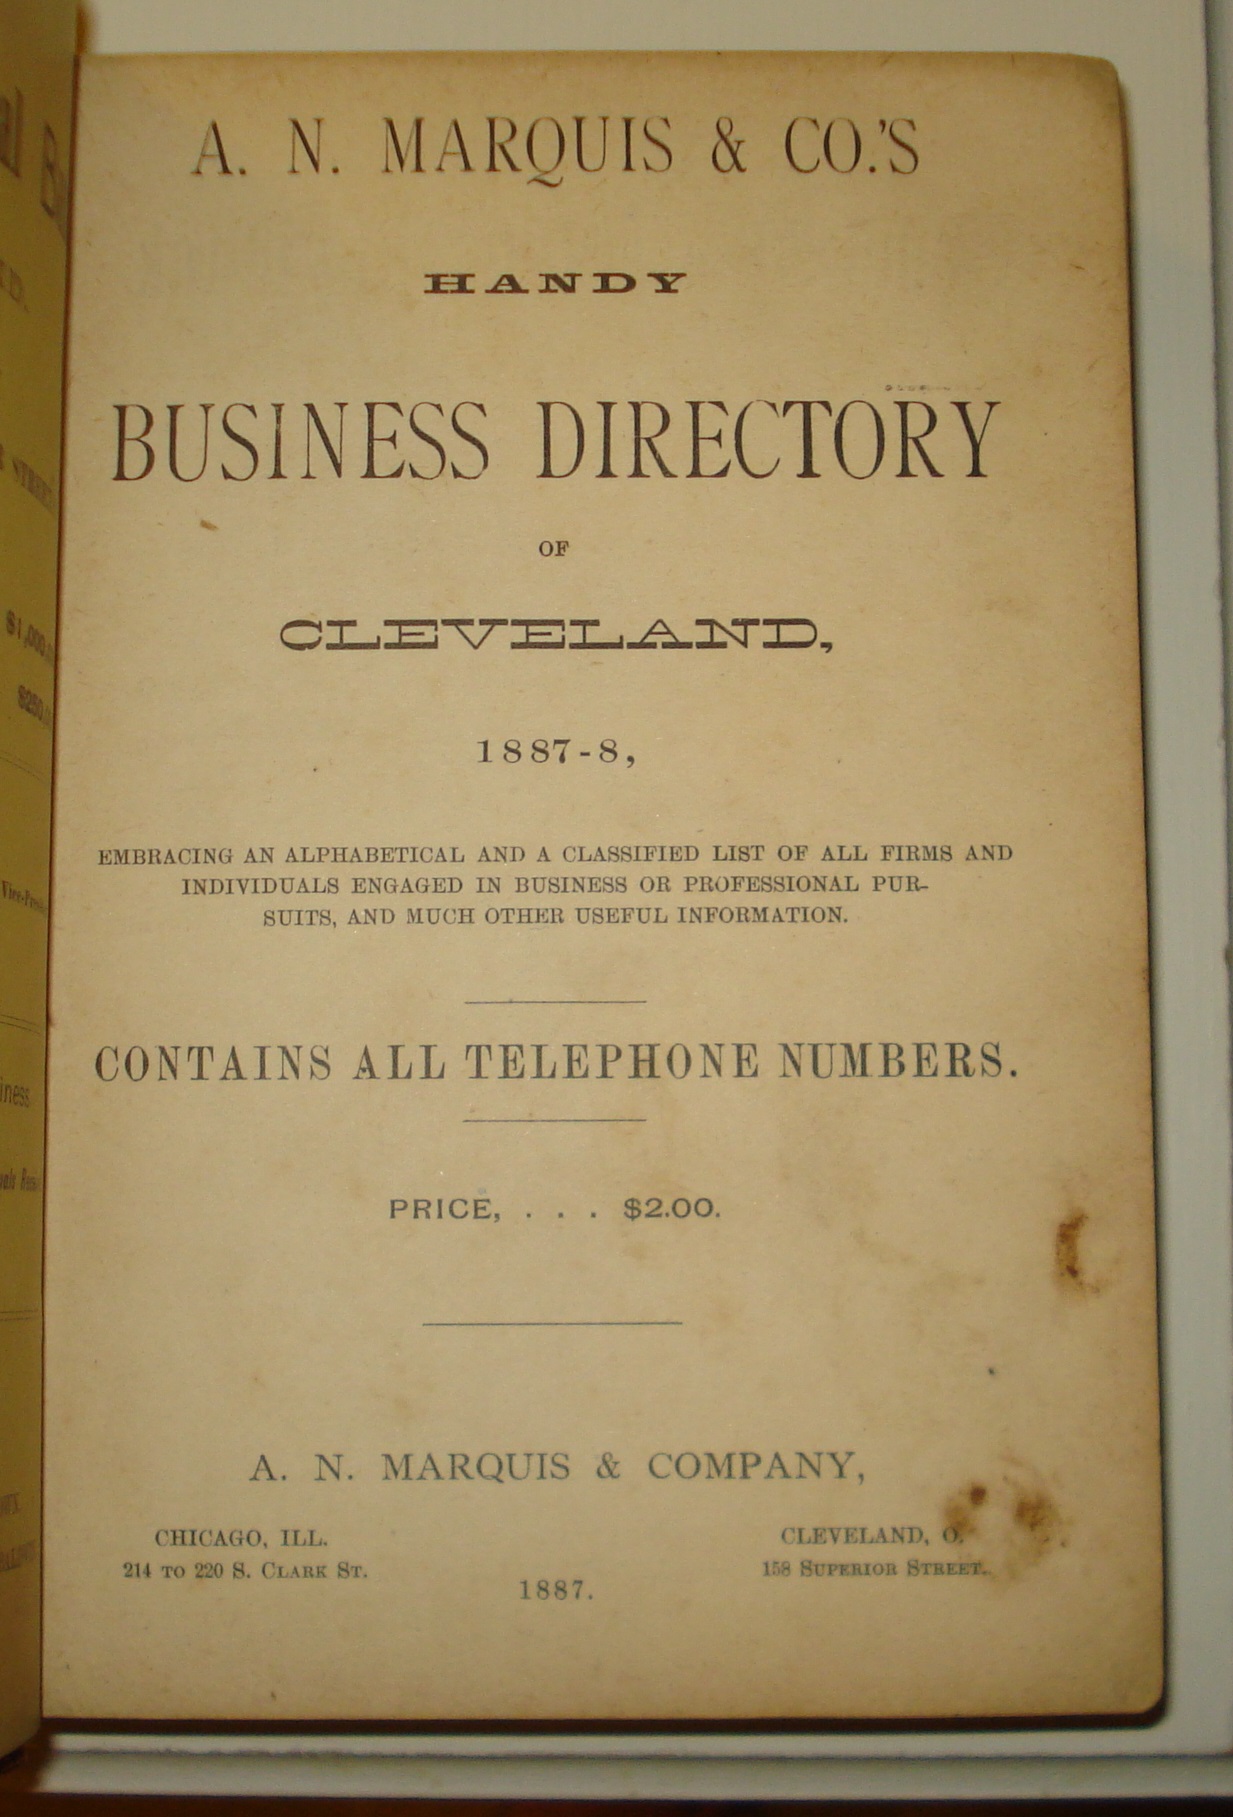 Book Cleveland OH business directory 1887 picture 3.jpg